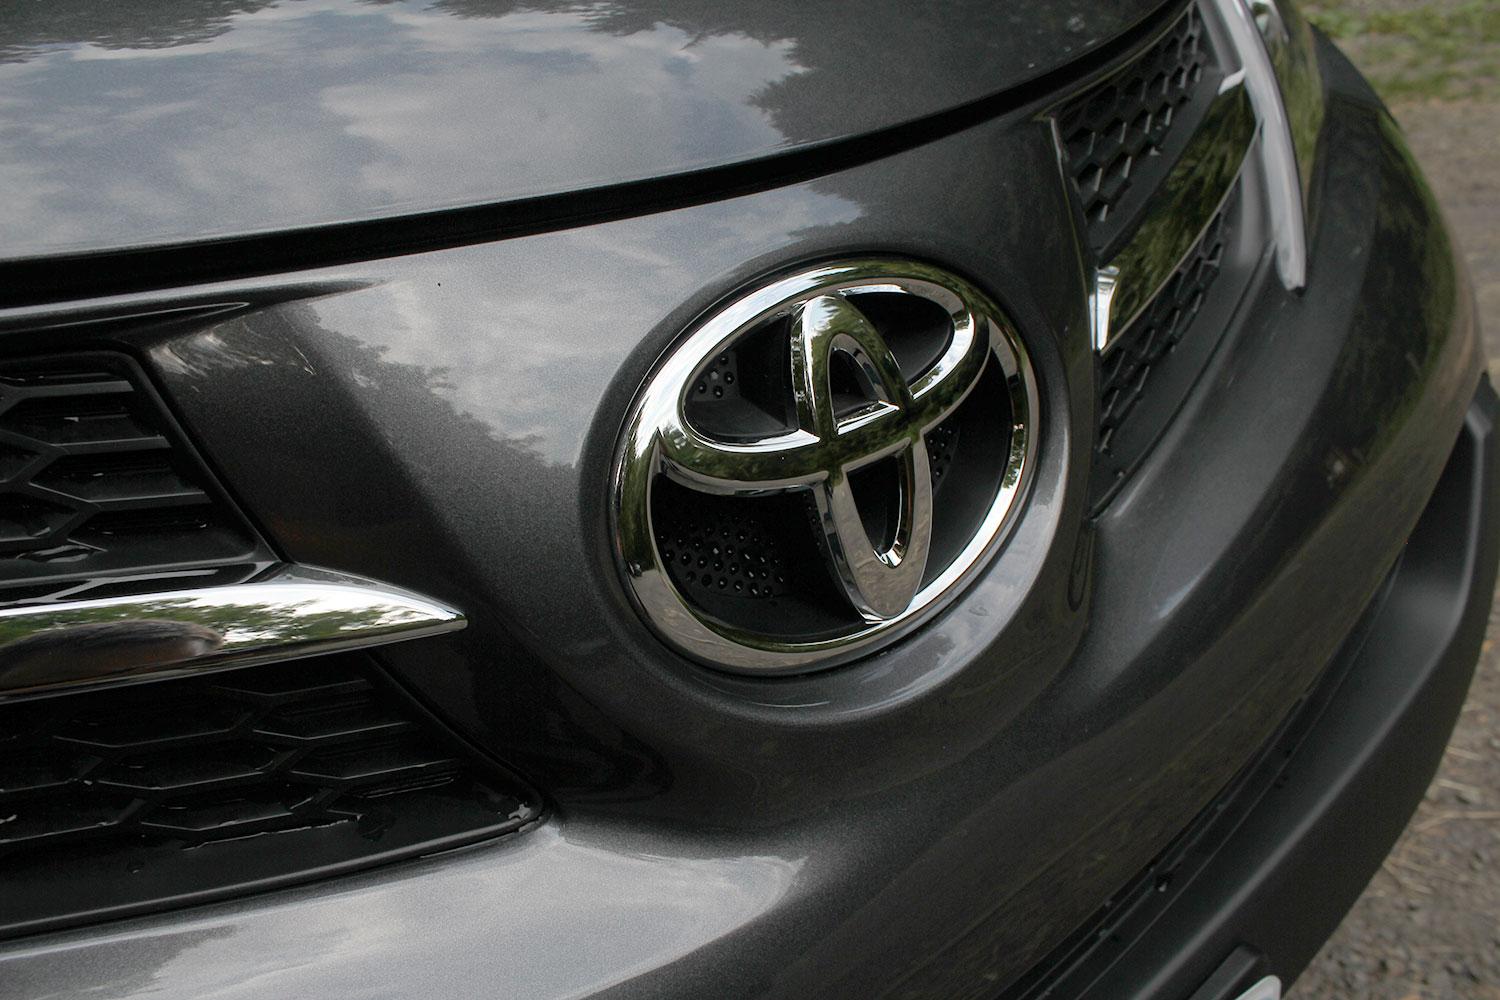 Toyota Files Patent for Device to Make Car Pillars Transparent